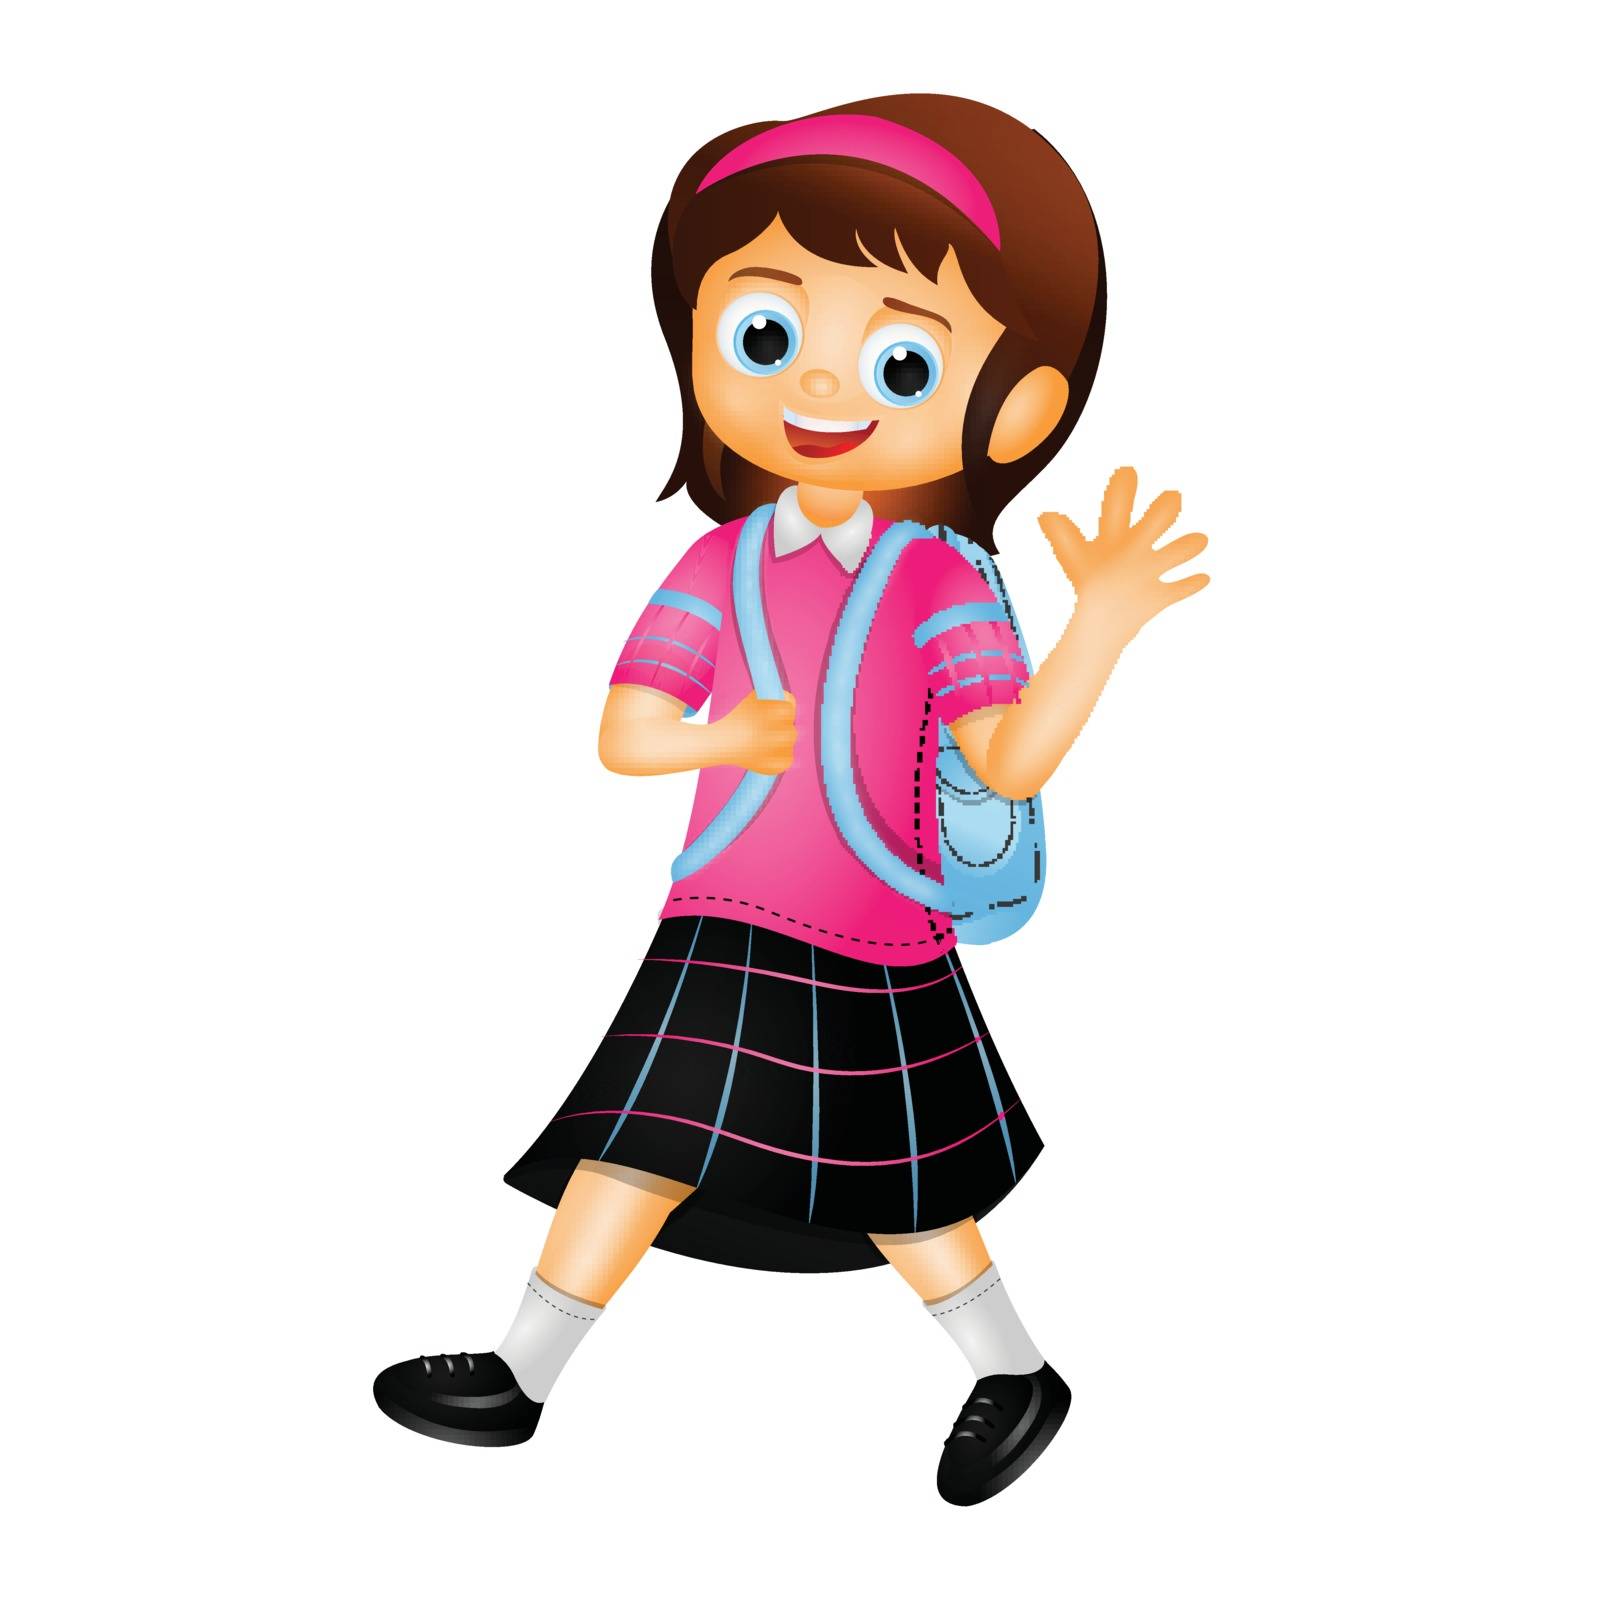 Cute girl going to school with backpack.